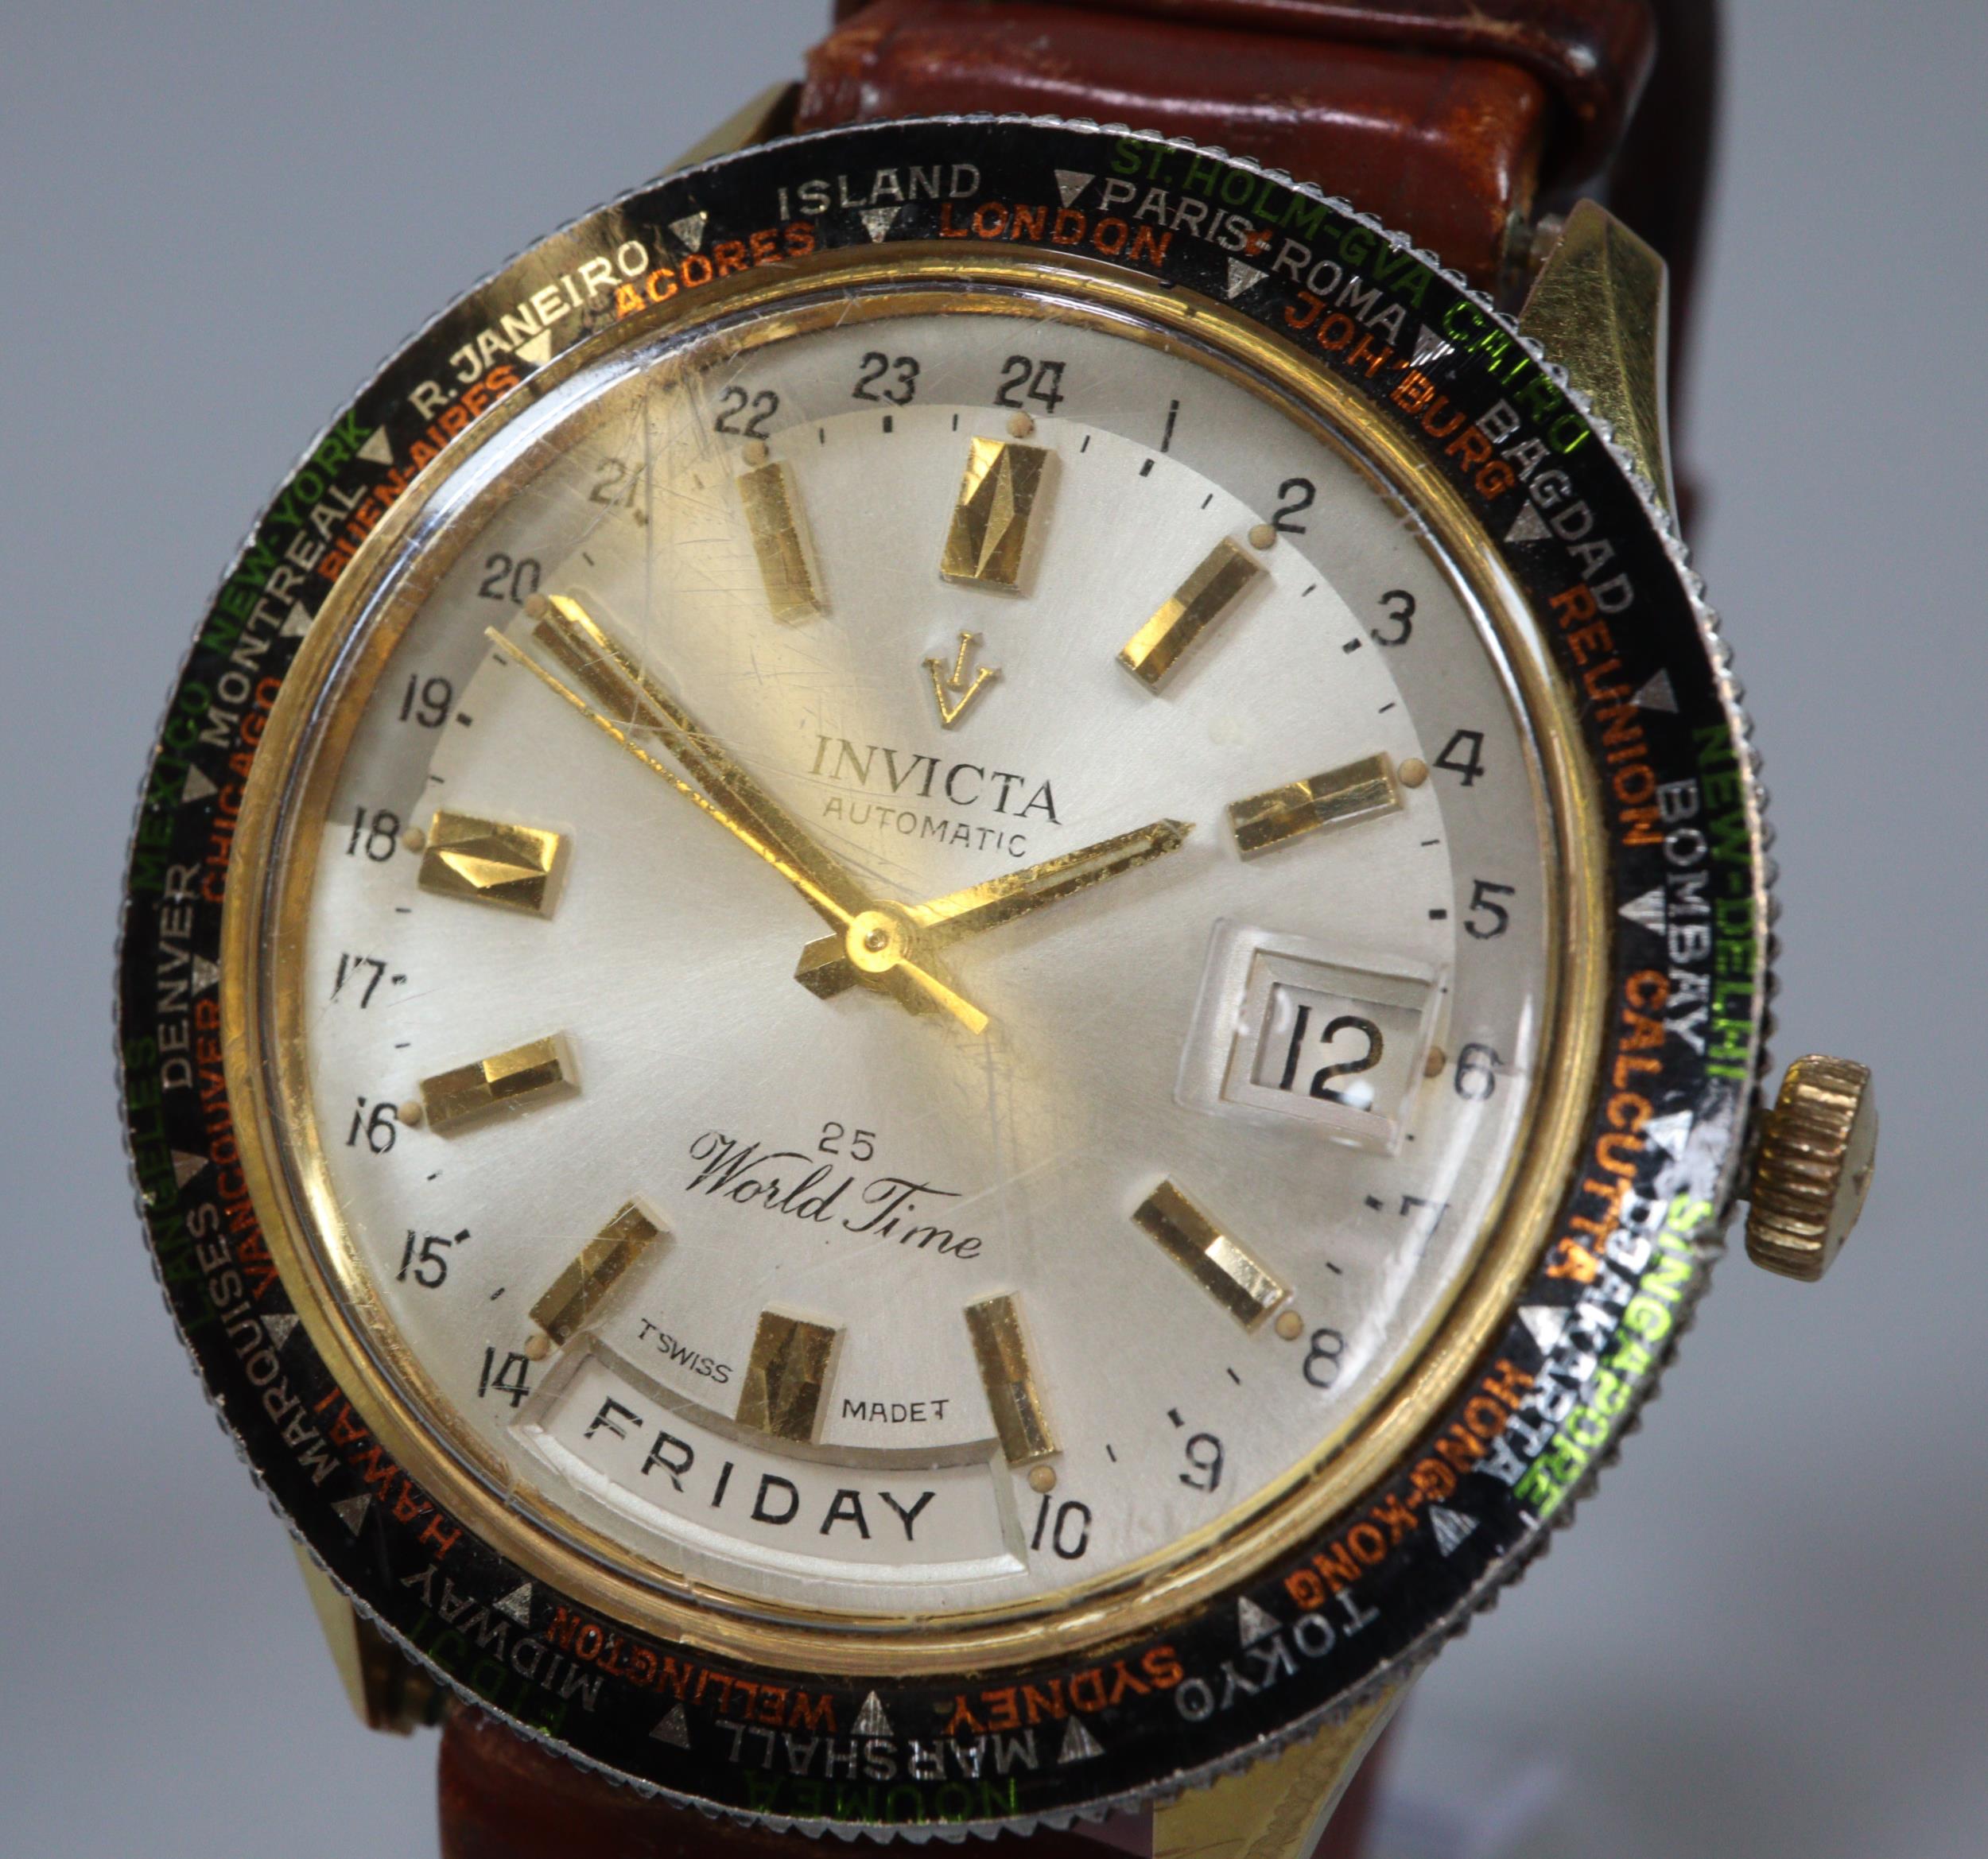 Invicta Automatic World Time gents wristwatch with leather strap (B.P. 21% + VAT) - Image 3 of 4